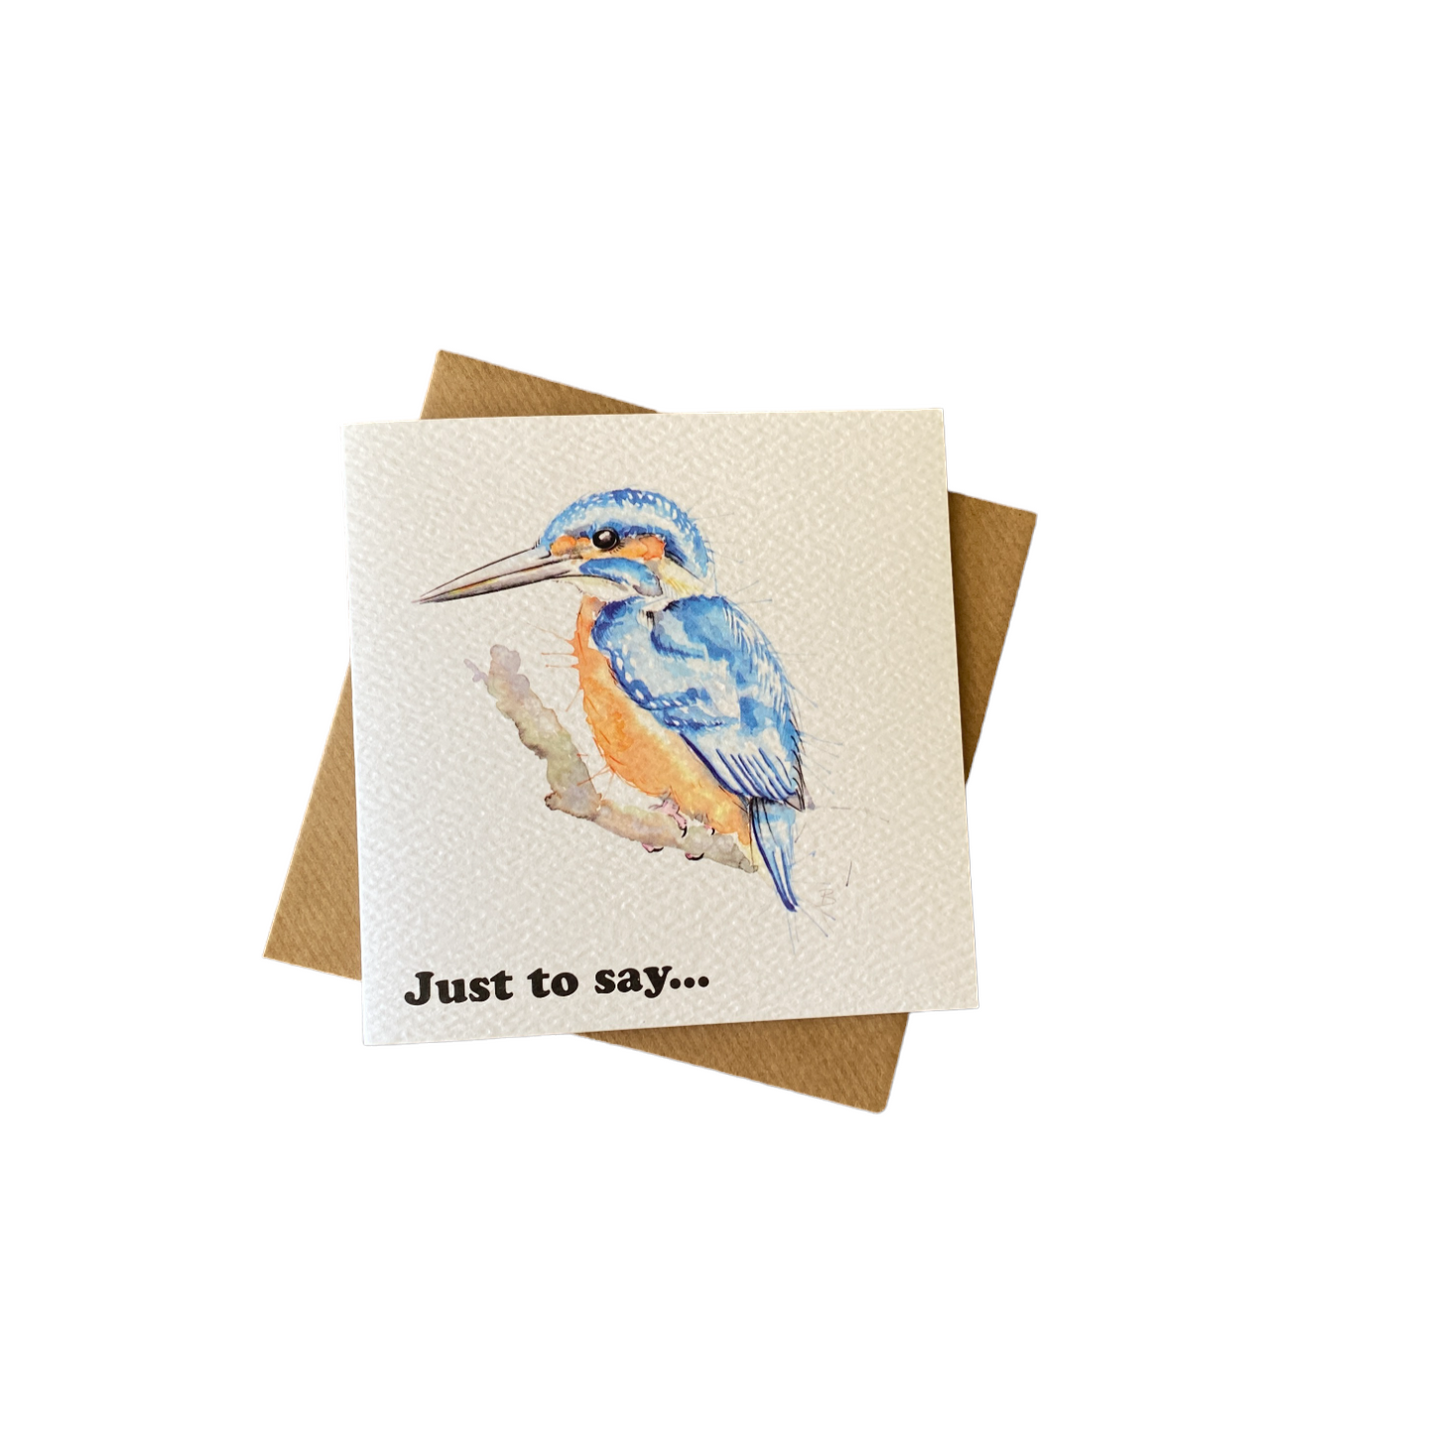 'Catch of the Day' Kingfisher "Just to say" Notecard